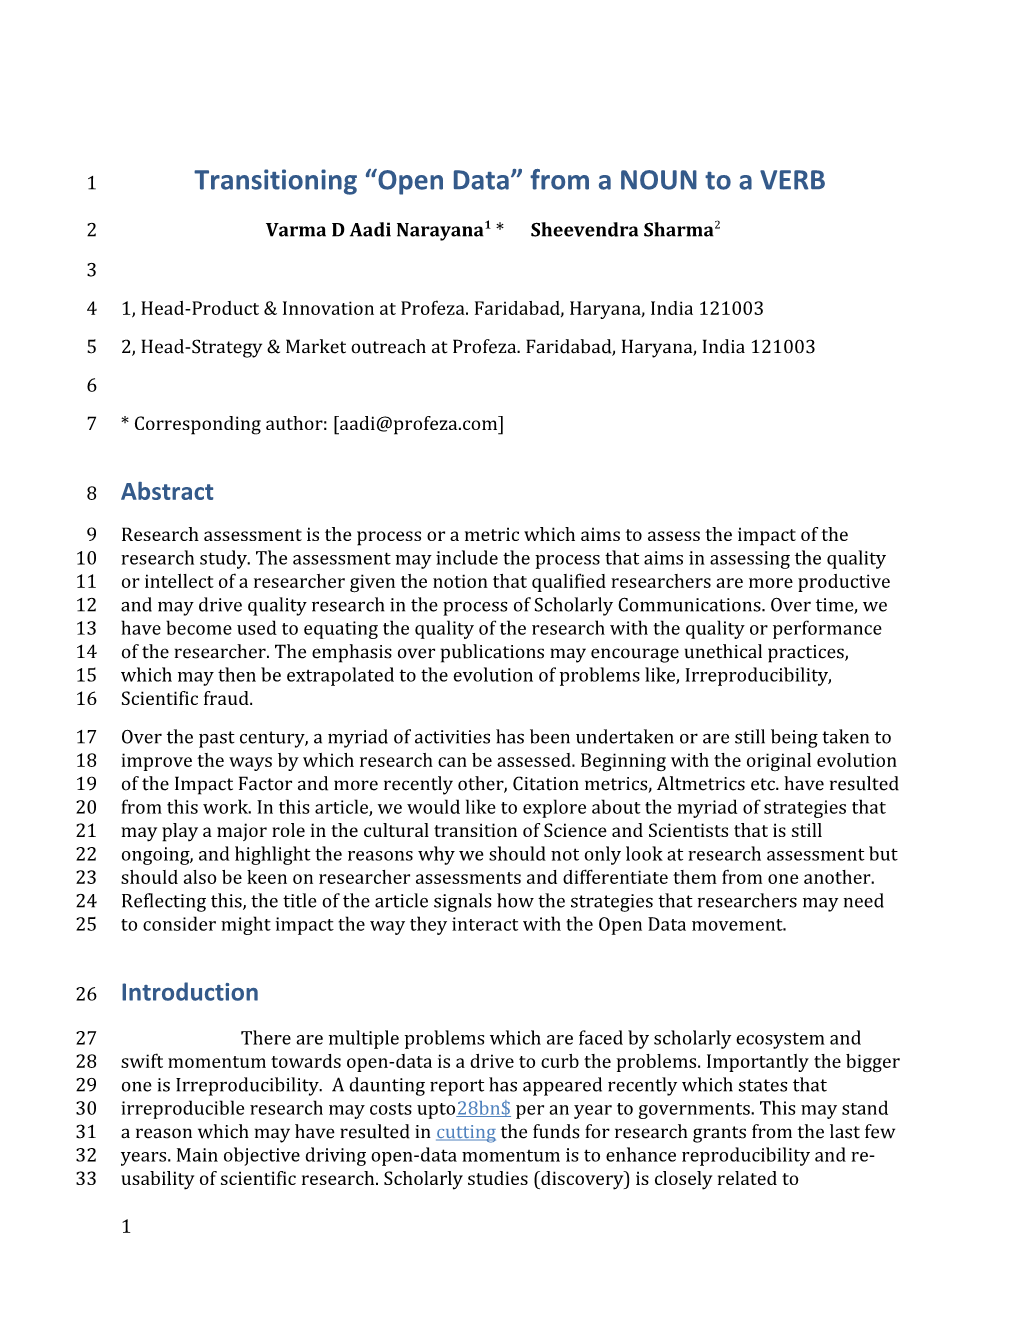 Transit Towards Open-Data: from Being a NOUN to a VERB